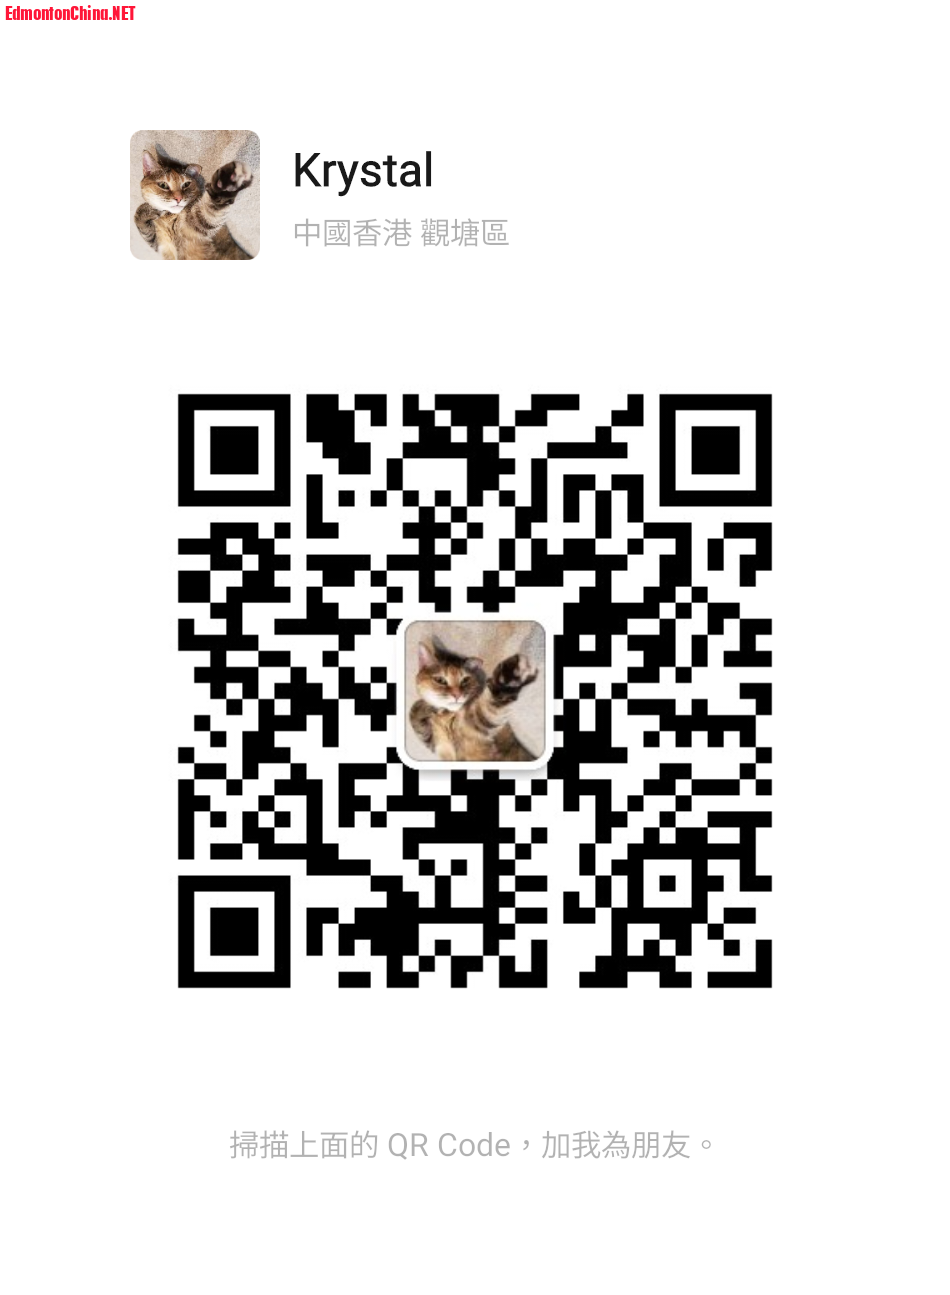 mmqrcode1676141782269.png